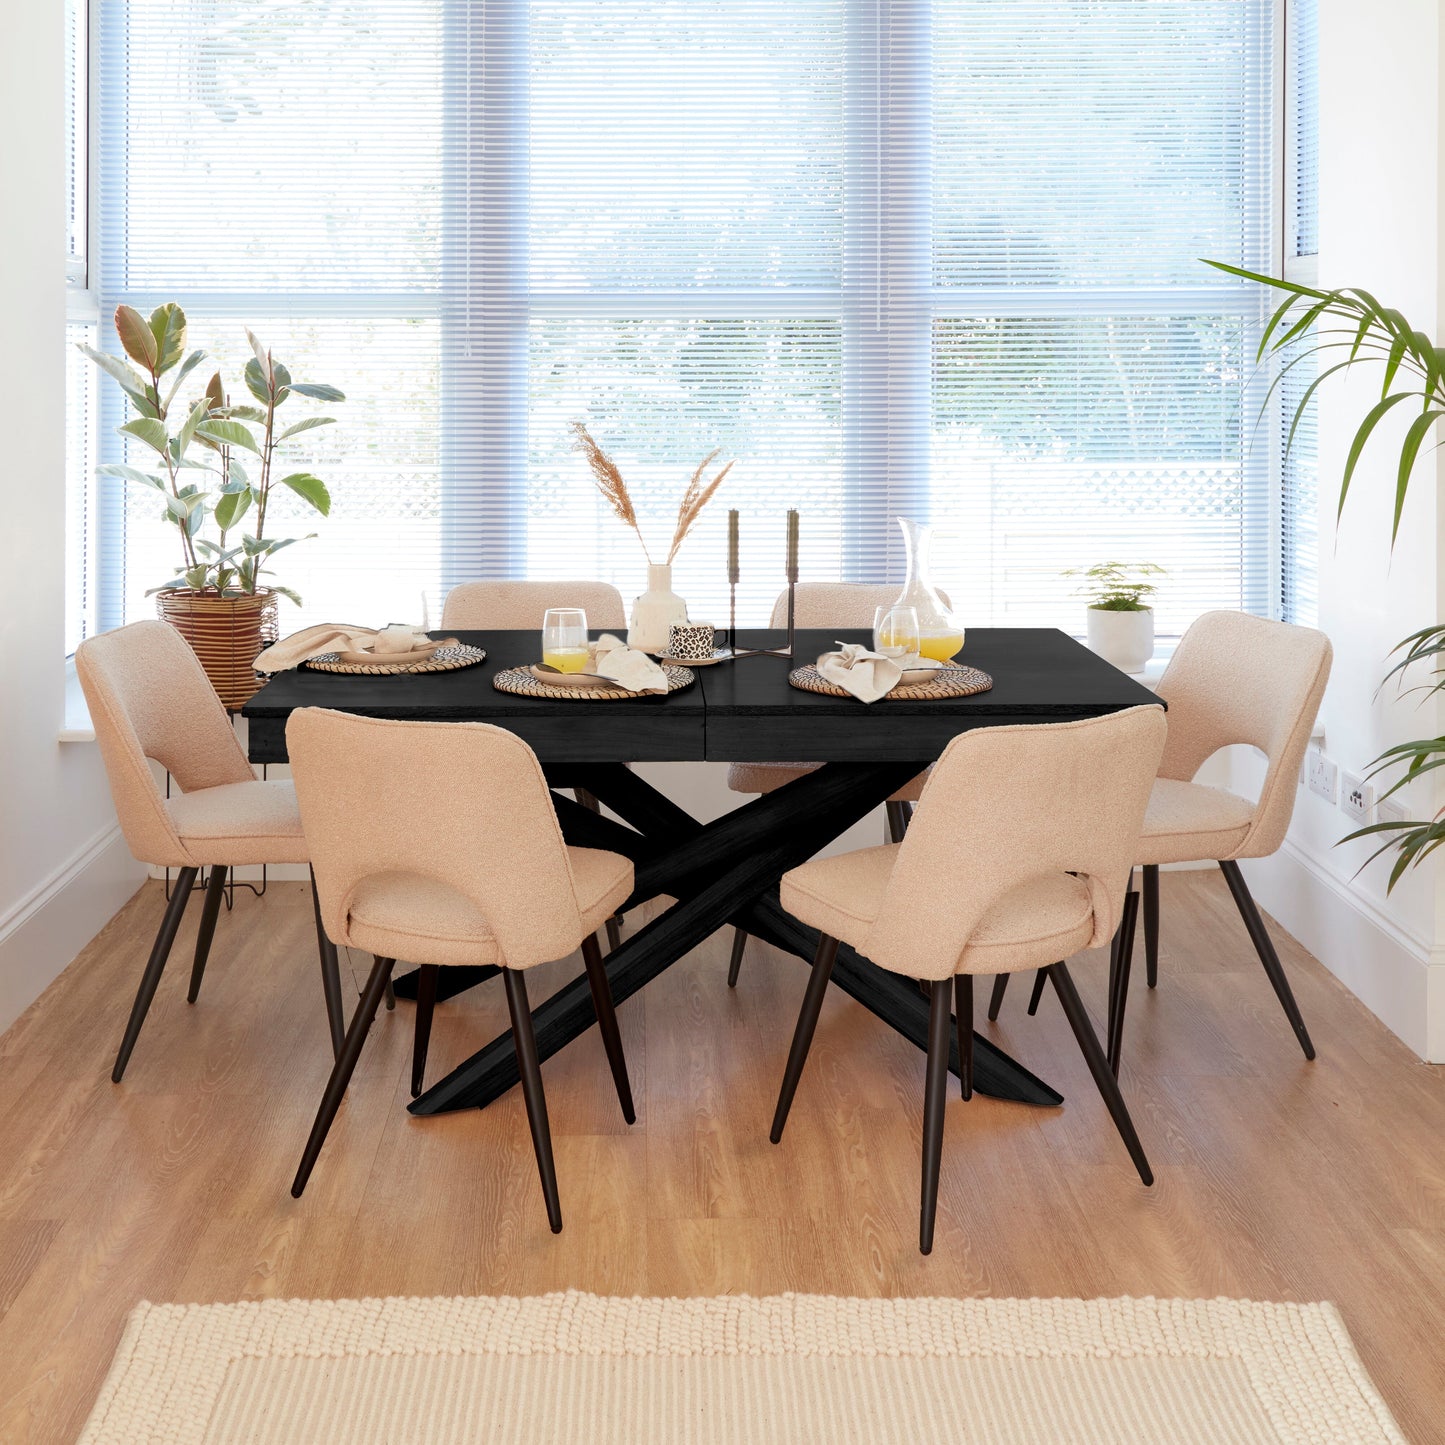 Amelia Black Extending Dining Table Set - 6 Seater - Dolly Dining Chairs - Laura James